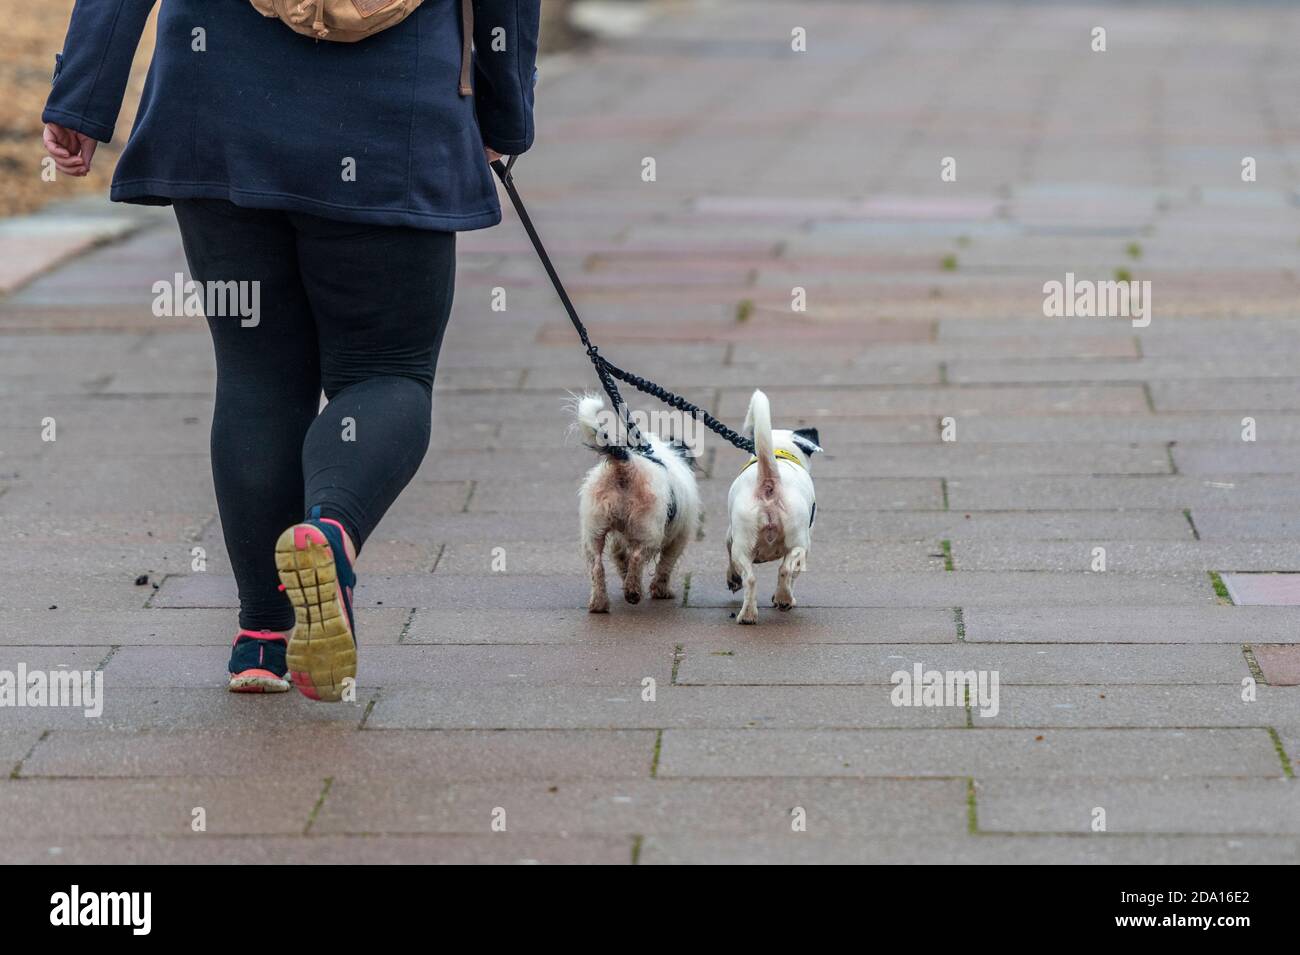 a large or overweight woman walking two small terrier dogs on leads along a pavement. Stock Photo